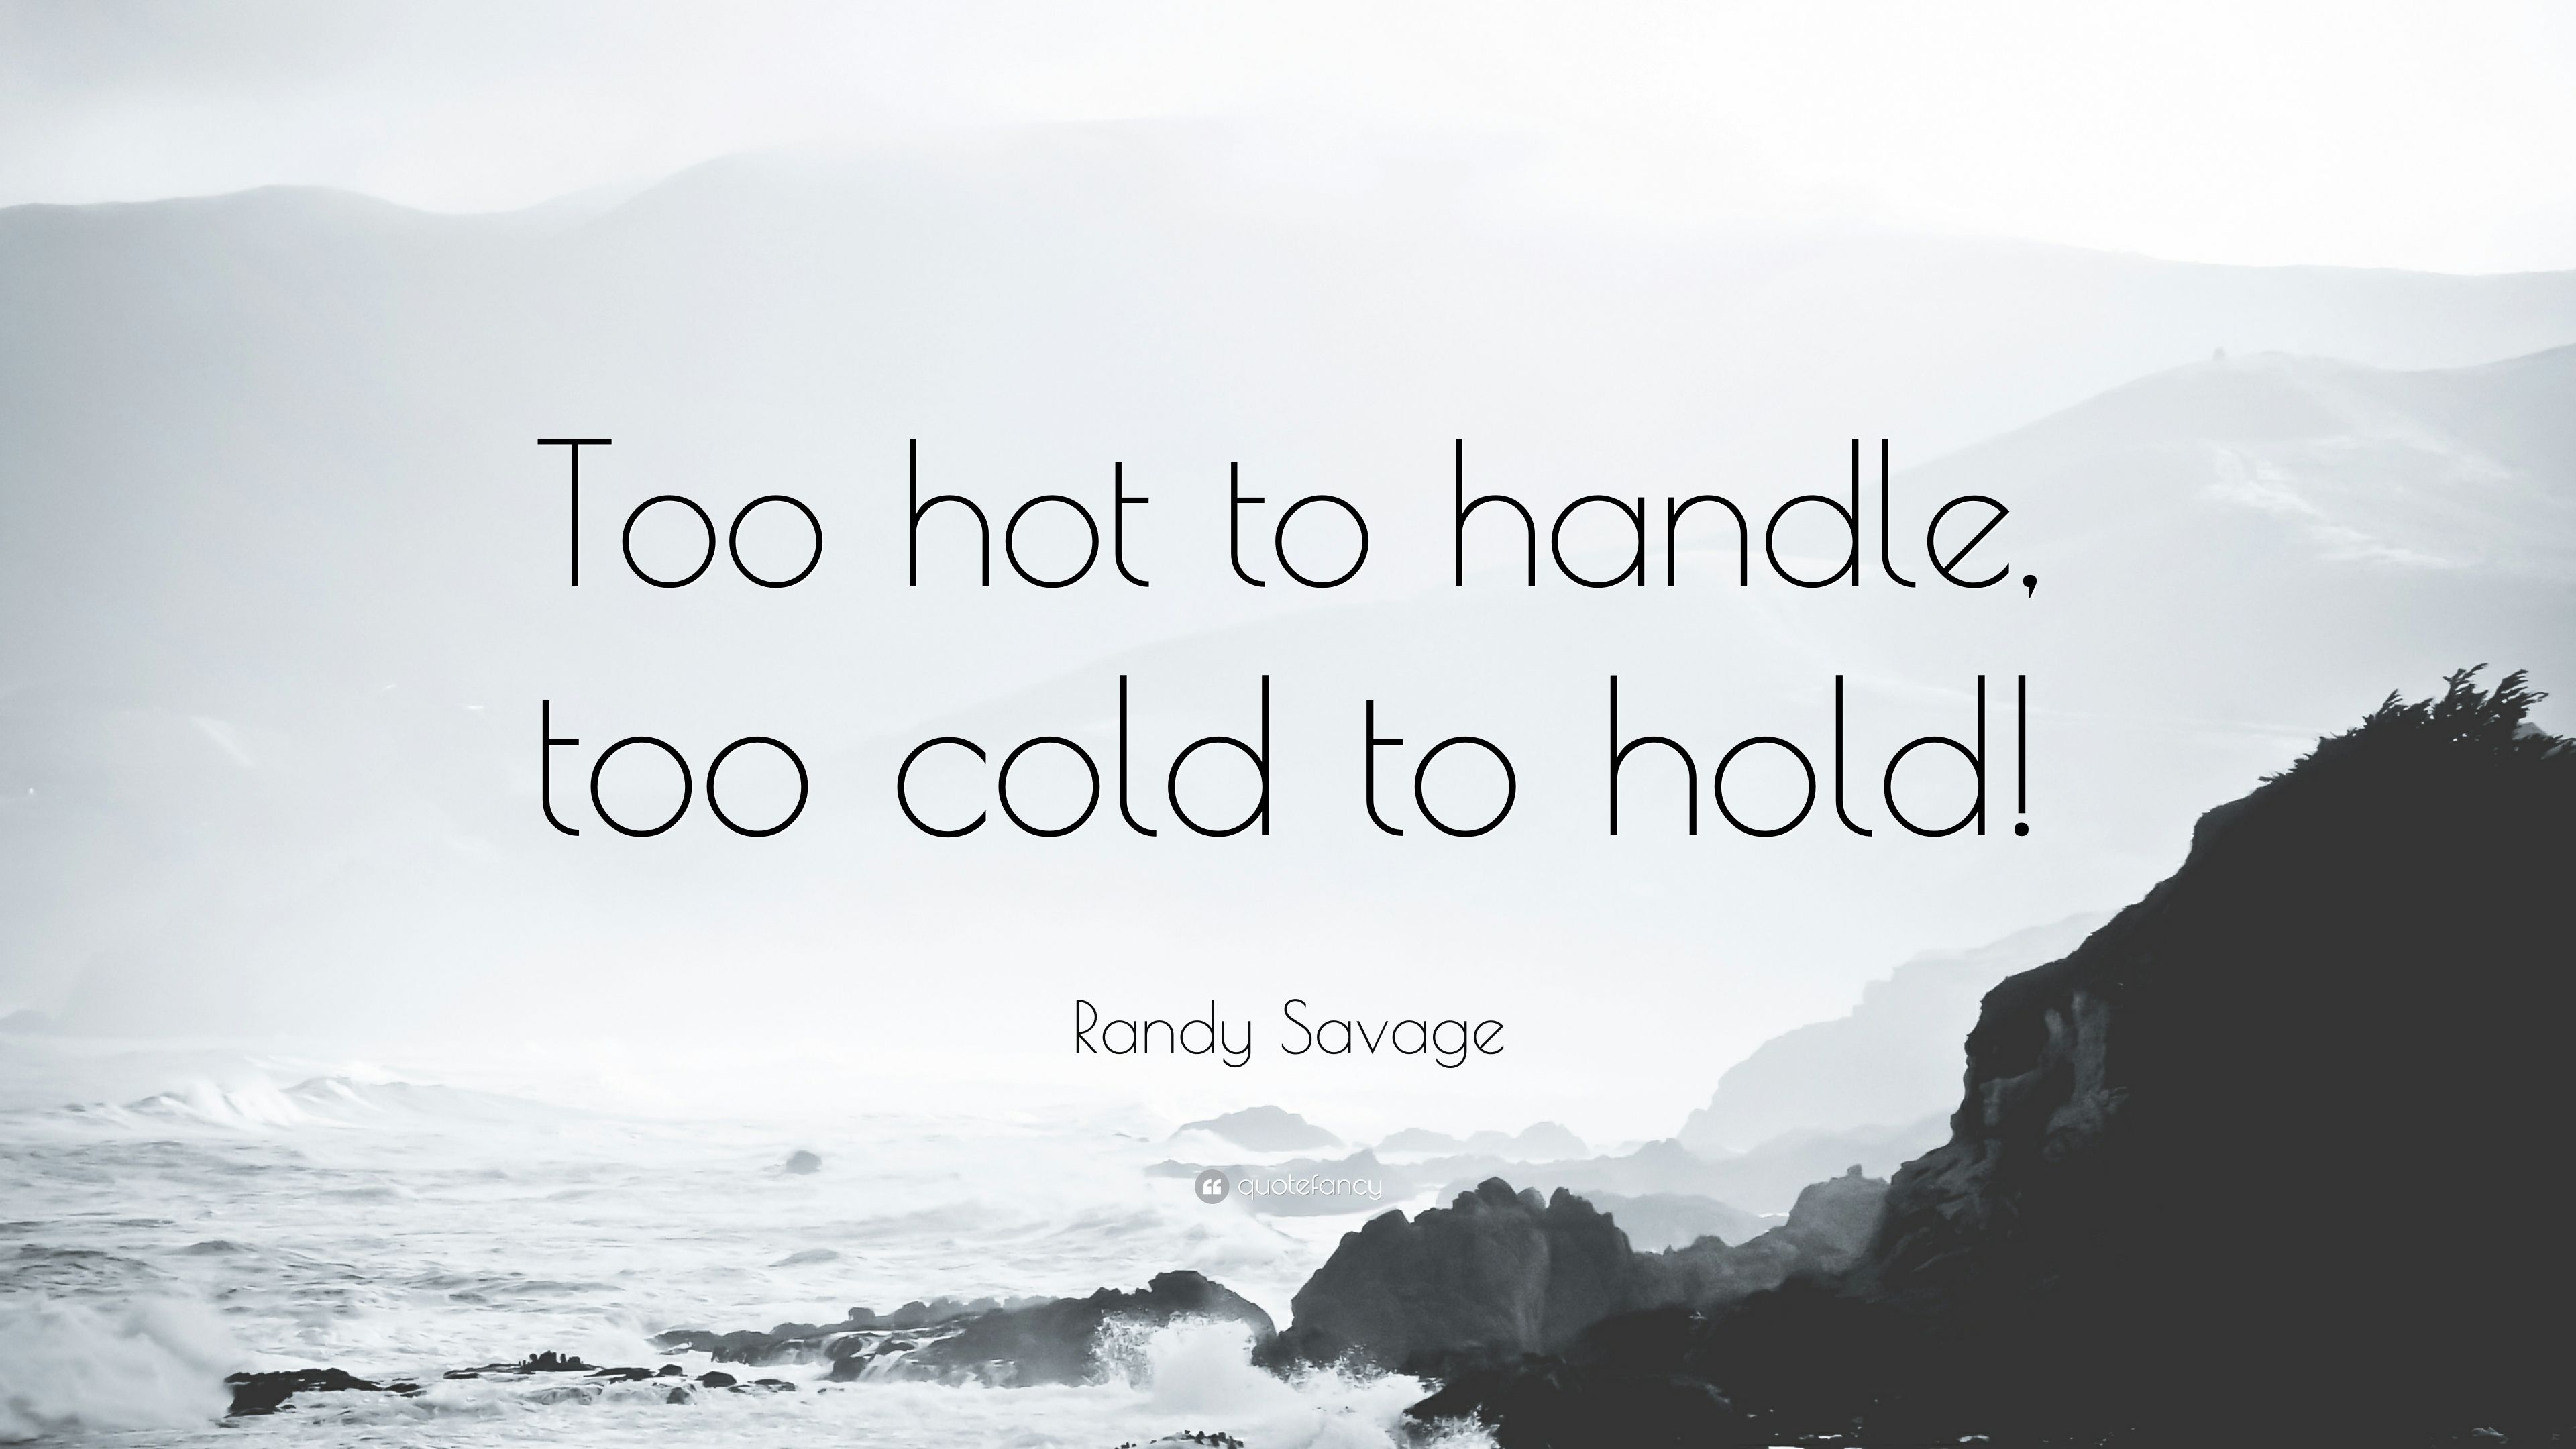 Savage quotes Randy savage quotes 22 wallpaper quotefancy